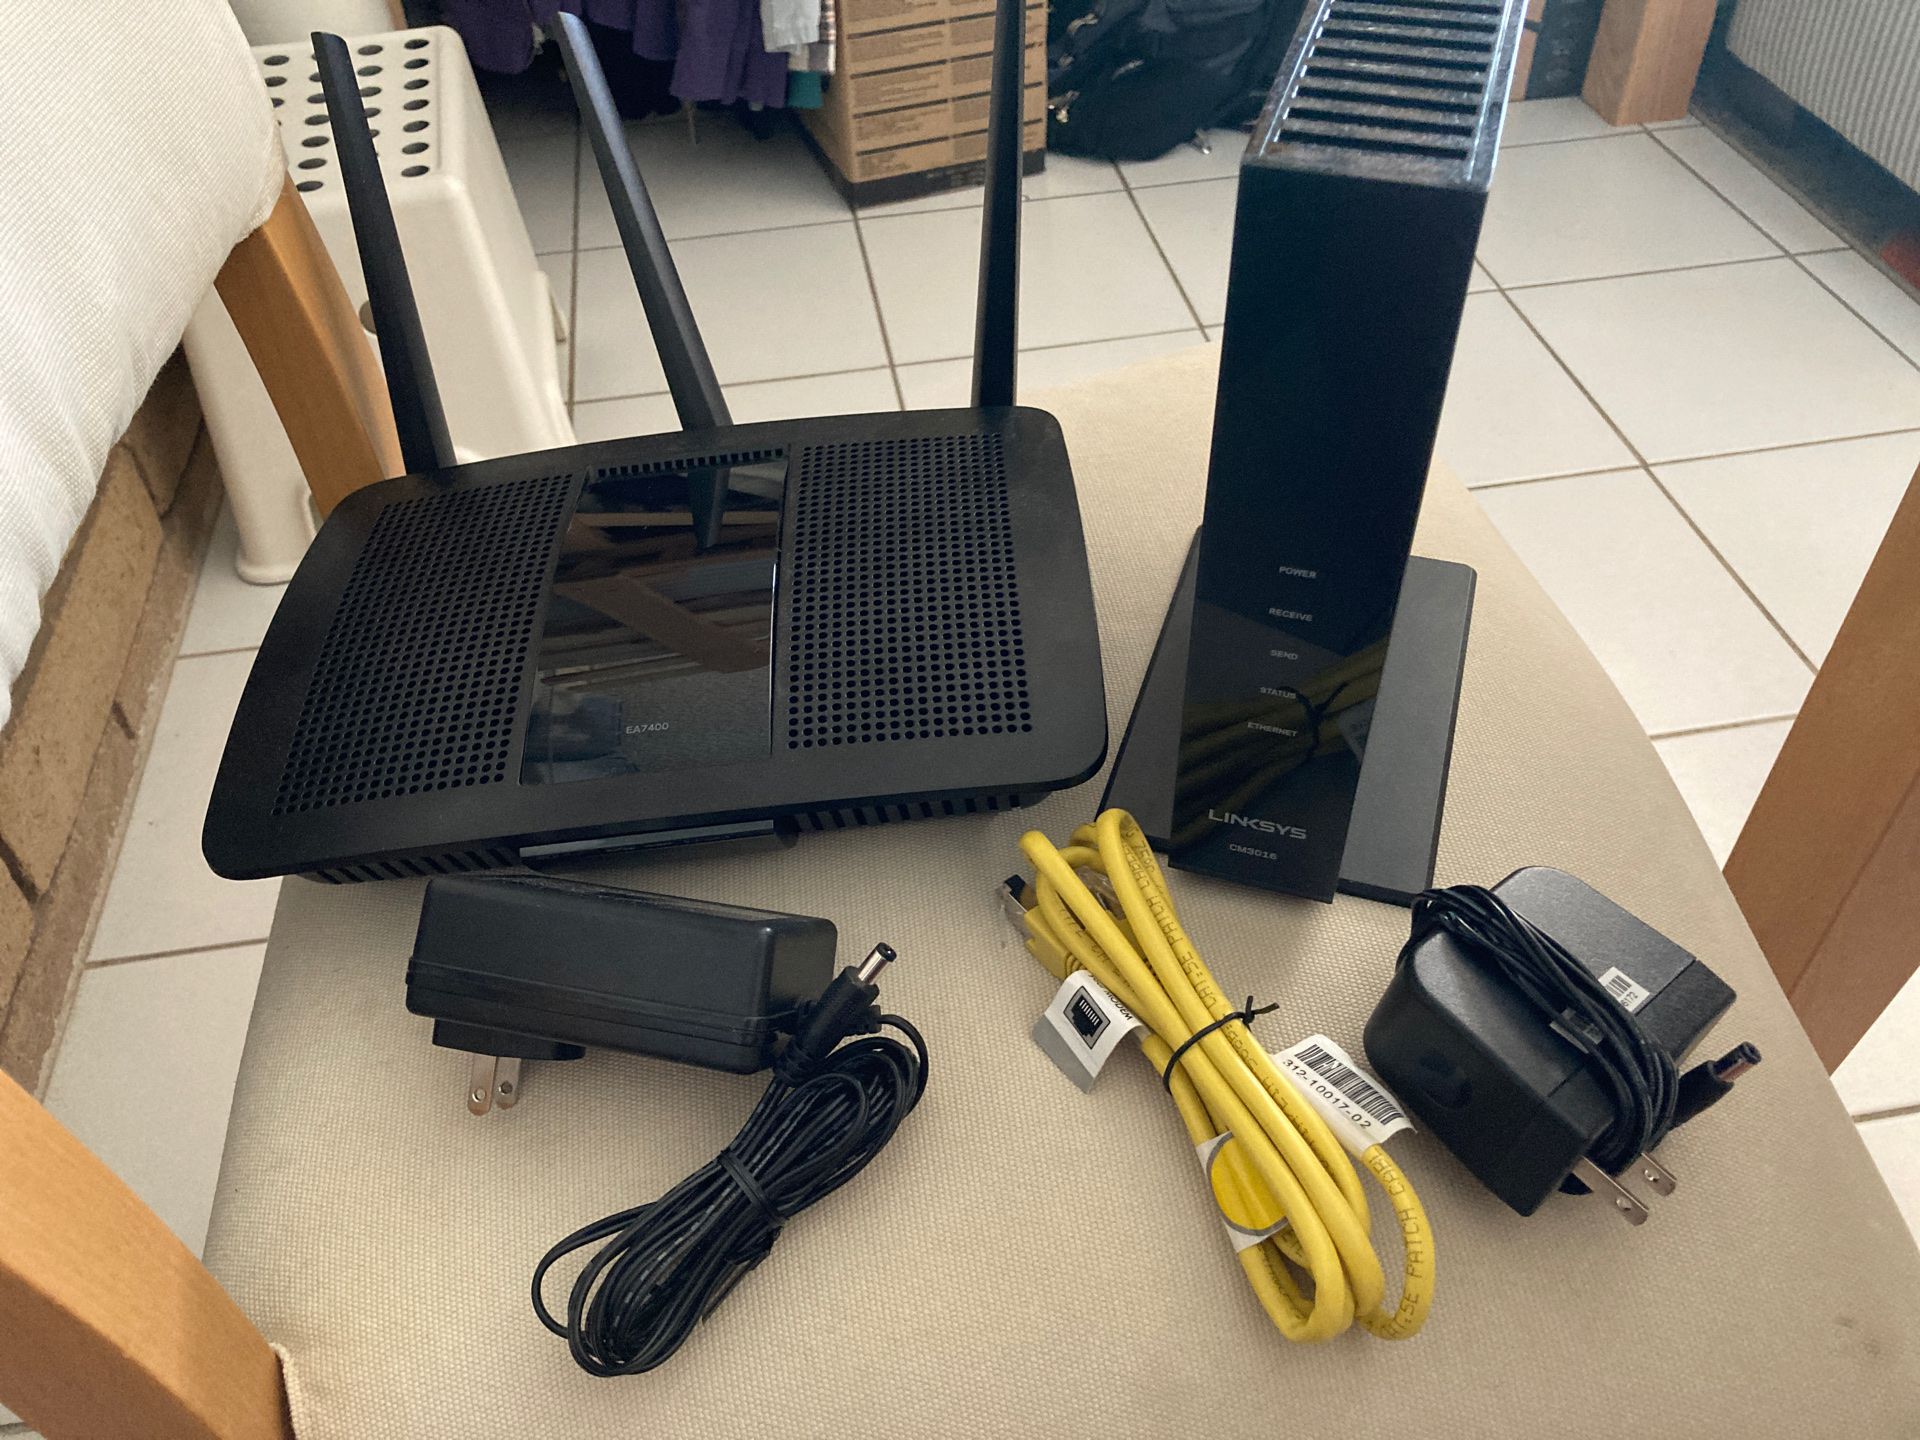 Linksys cm3016 modem and ea7400 router